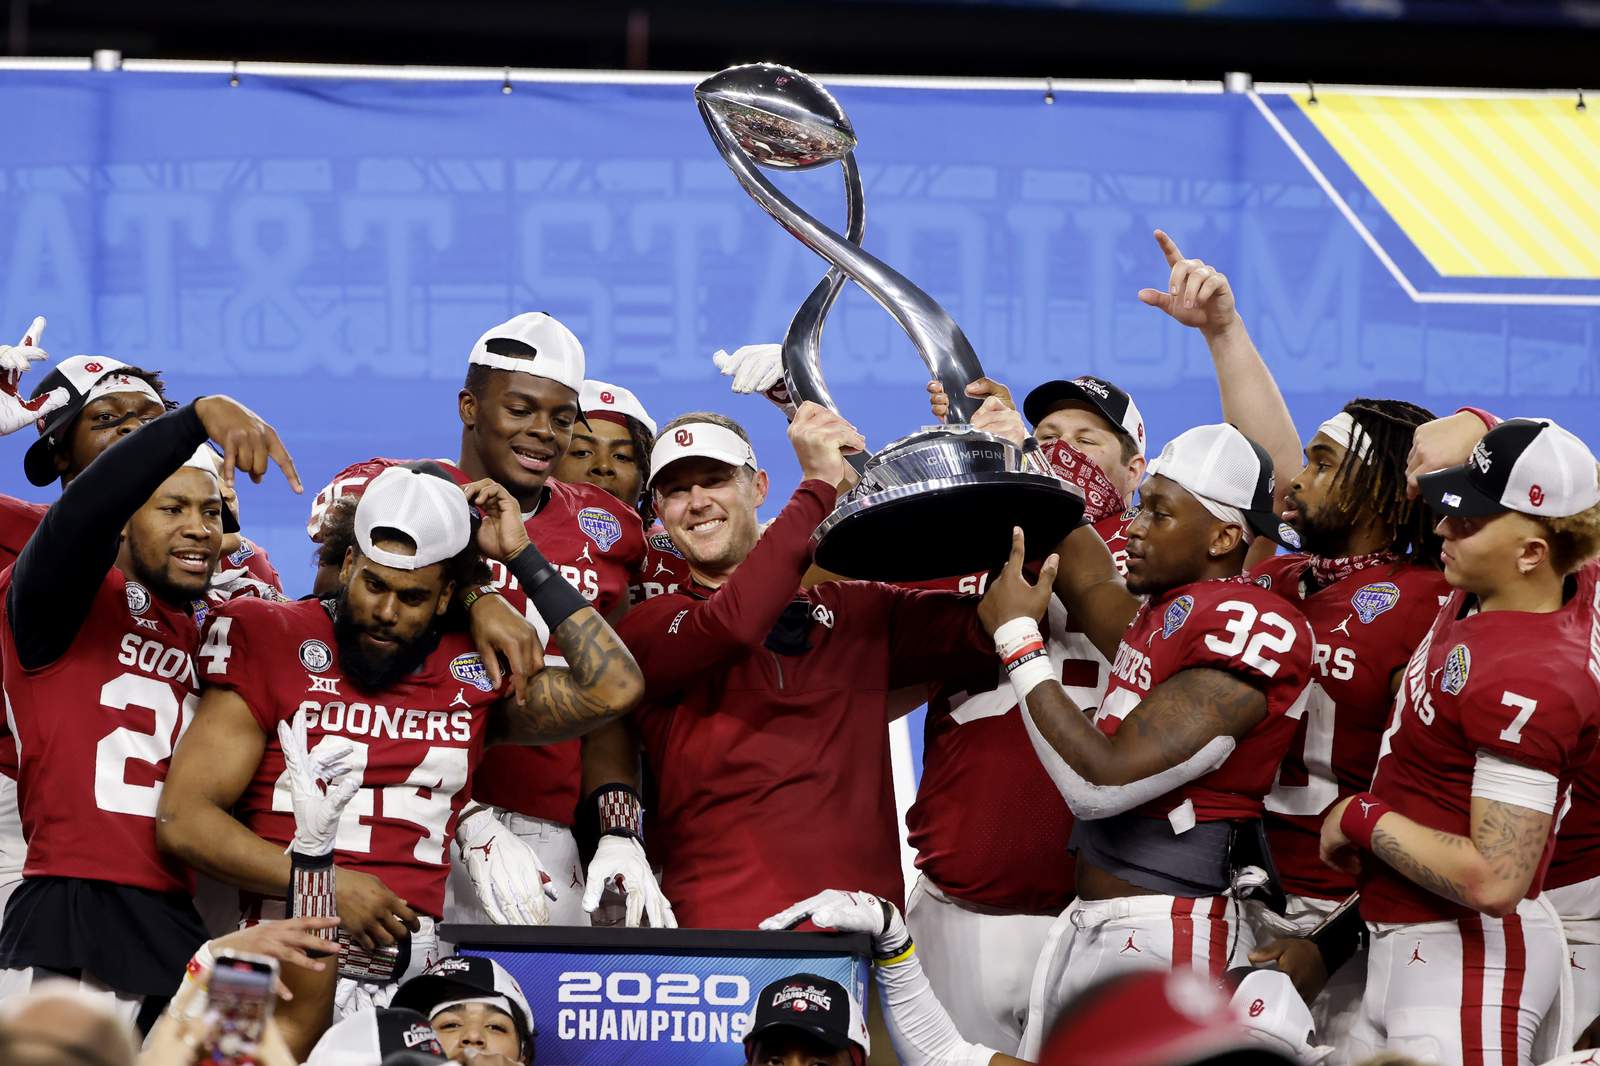 Gators rattled: No. 8 Oklahoma routs Florida in Cotton Bowl